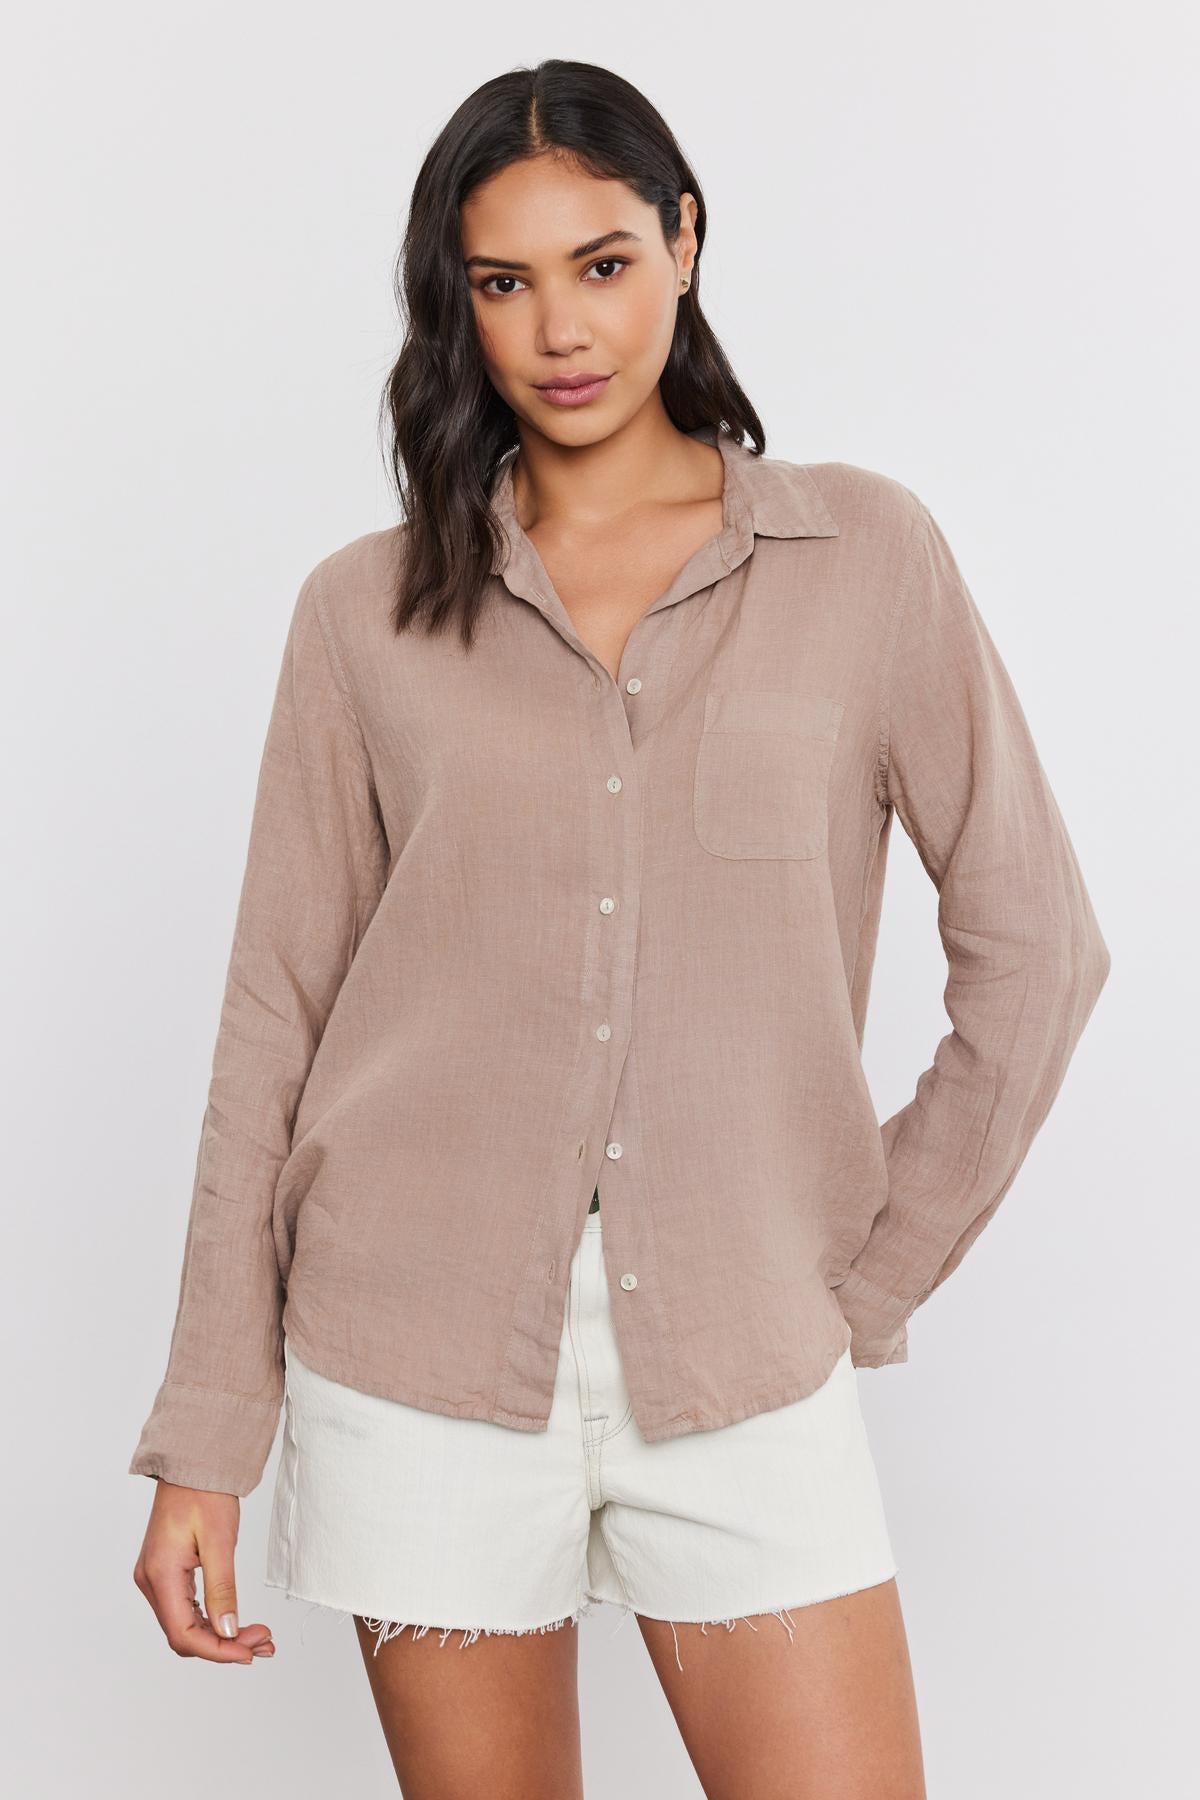   A woman with shoulder-length dark hair wearing a casual beige Velvet by Graham & Spencer Natalia Linen Button-Up Shirt and white frayed shorts, both in a relaxed silhouette. 